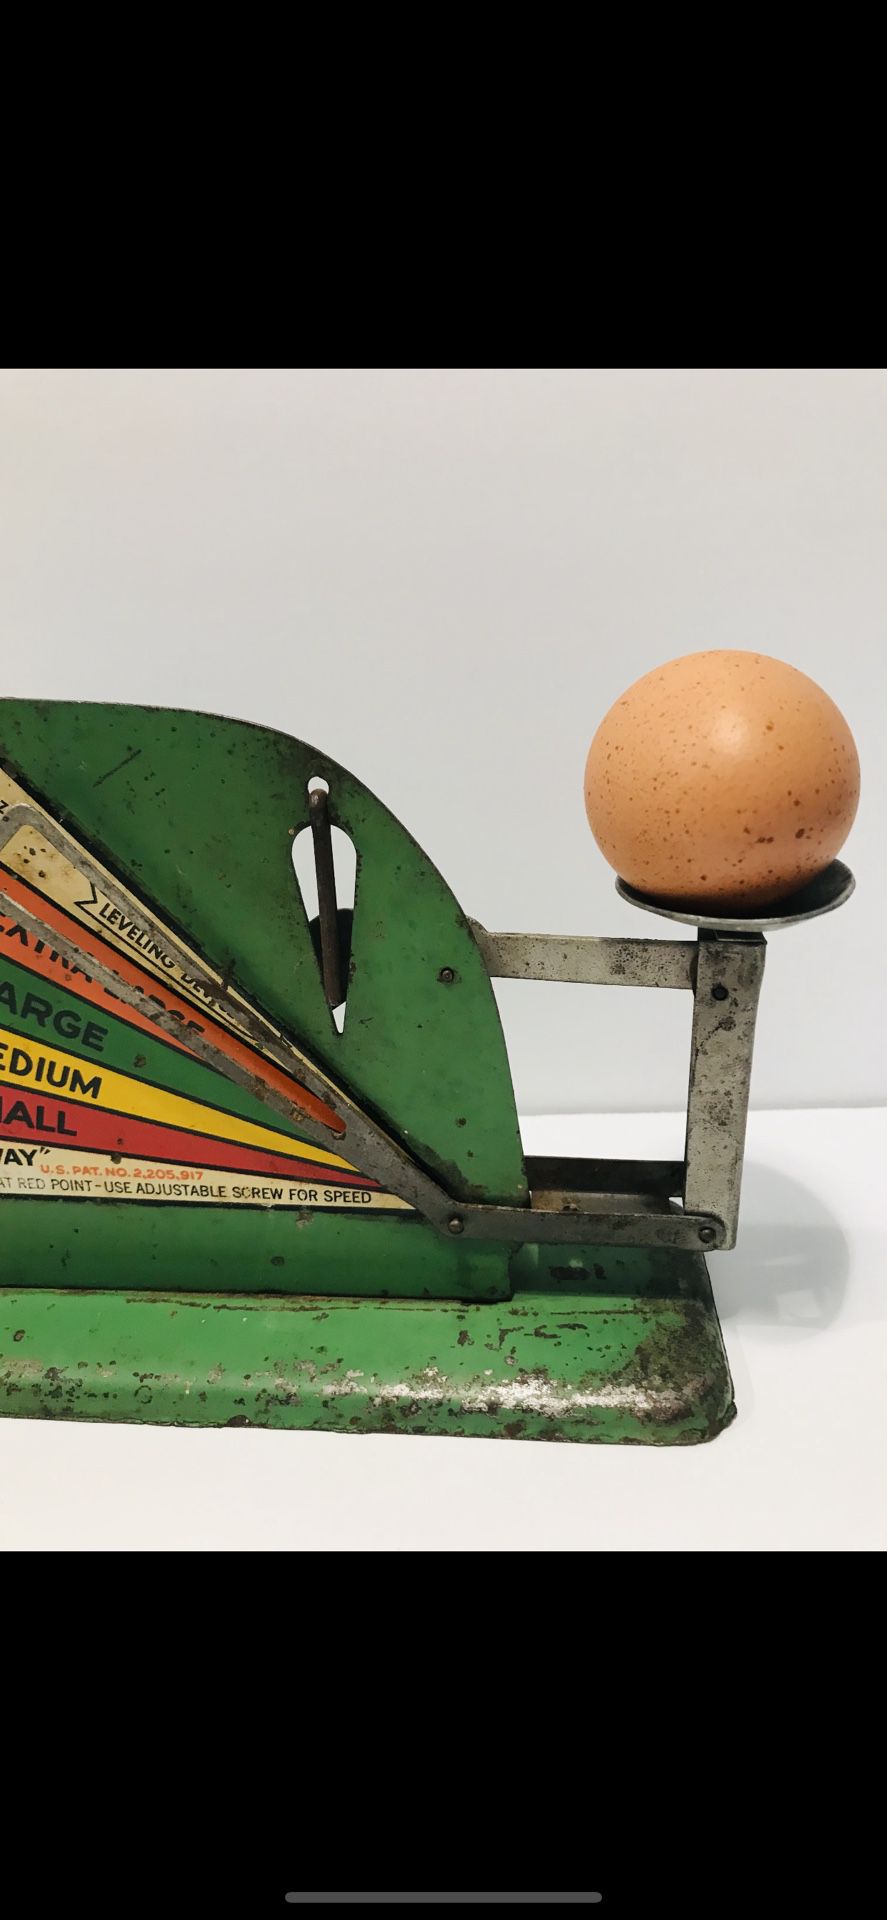 Sold at Auction: Vintage Jiffy-Way Metal Egg Scale Owatonna